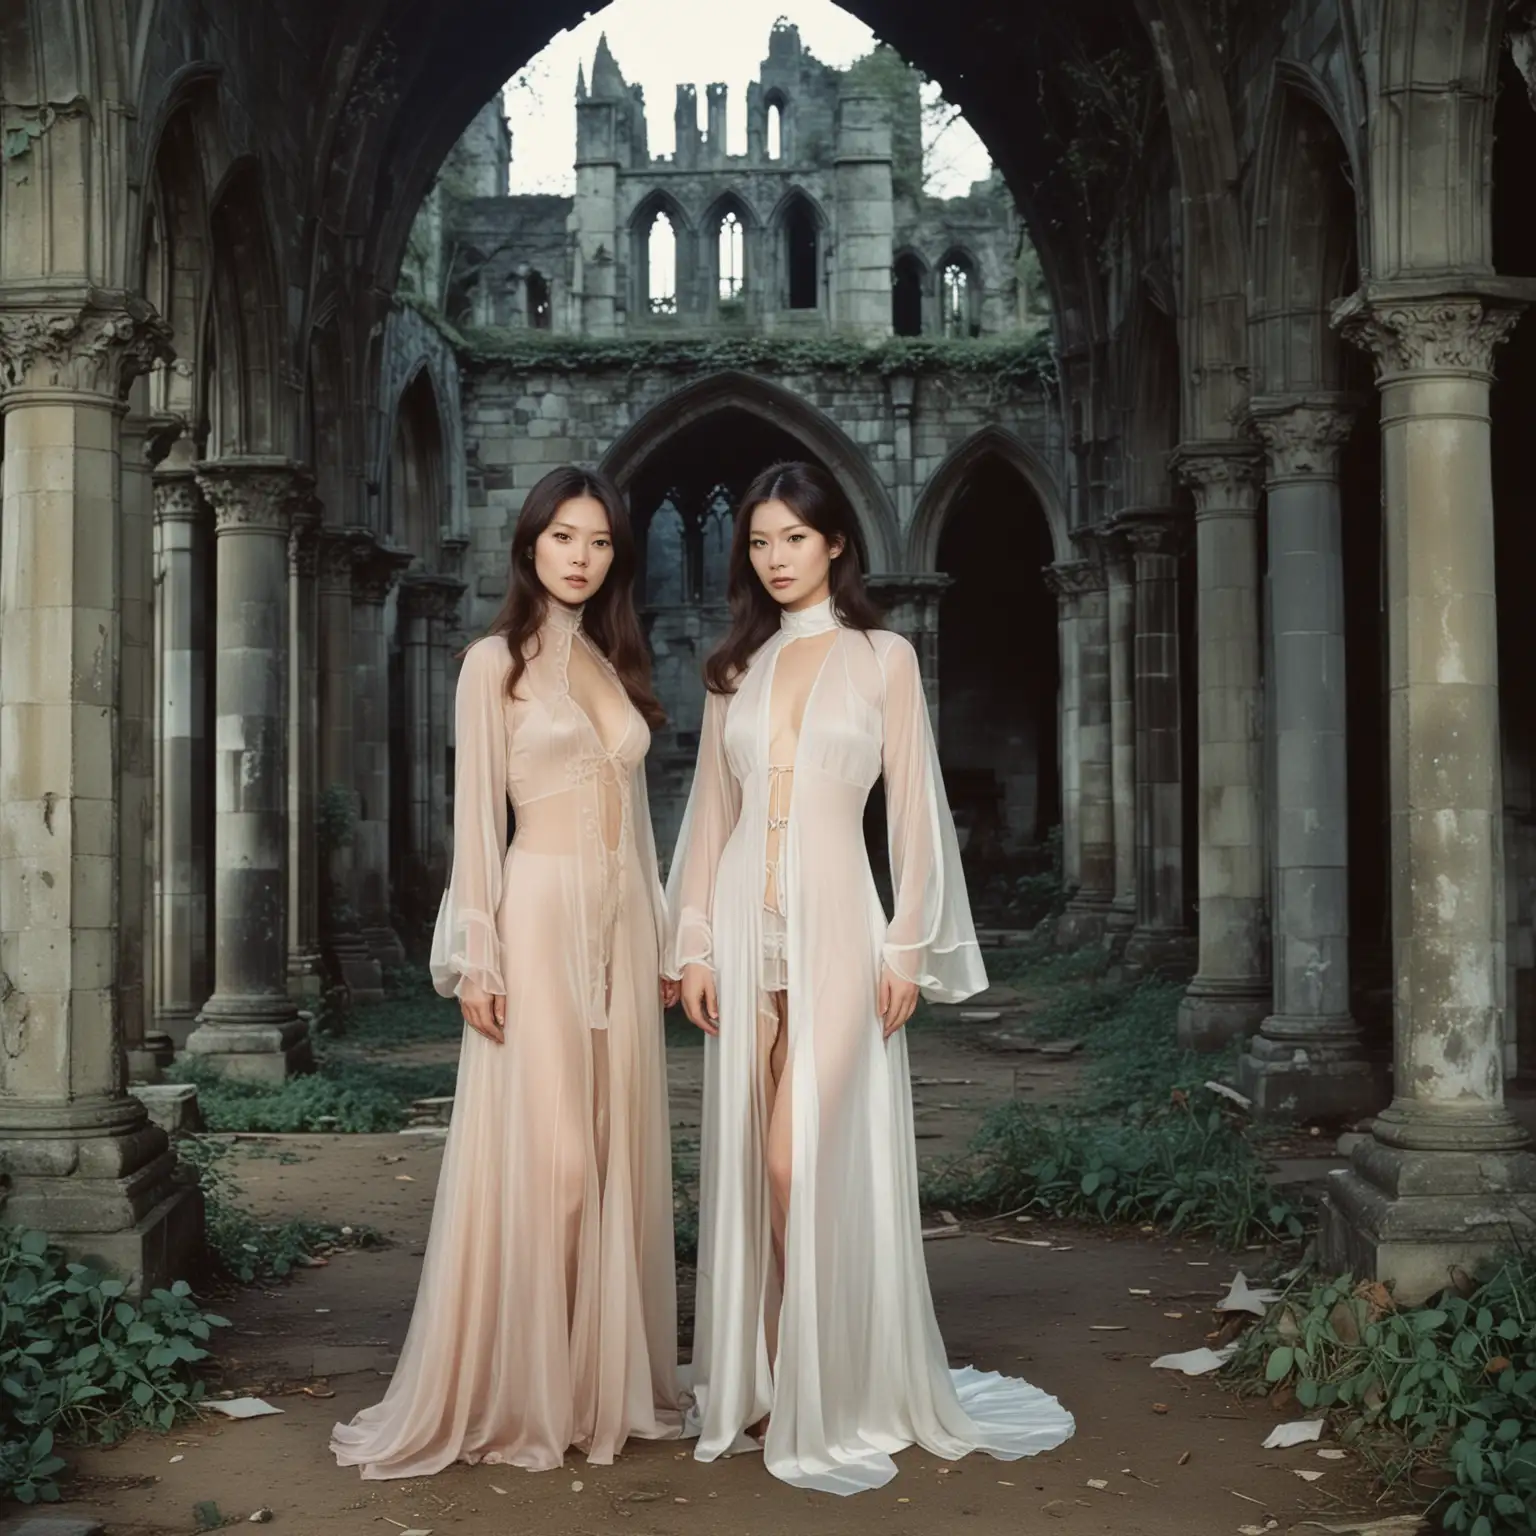 imagine a film poster for a 1970s British exploitation vampire film, called “The Manor”, sensual Japanese sisters in unbuttoned translucent silk gown, standing at a ruined gothic abbey, includes titles text in the style of a real film poster, patina worn